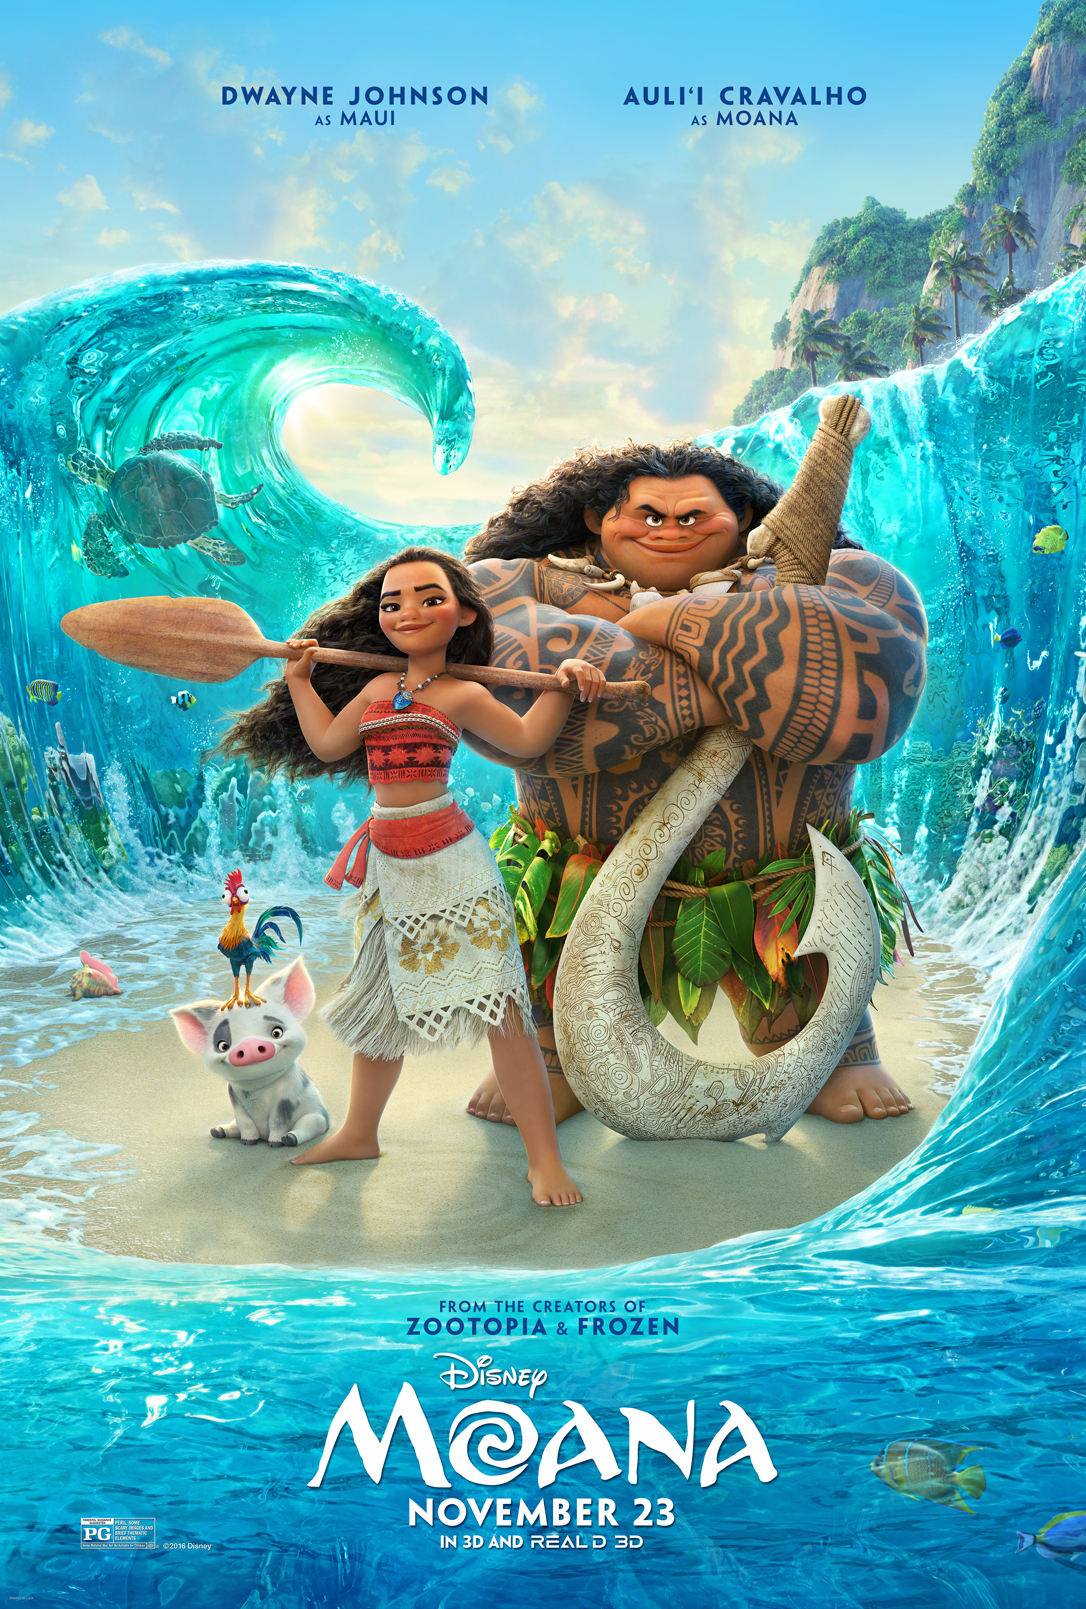 Moana’s New Poster And Trailer!